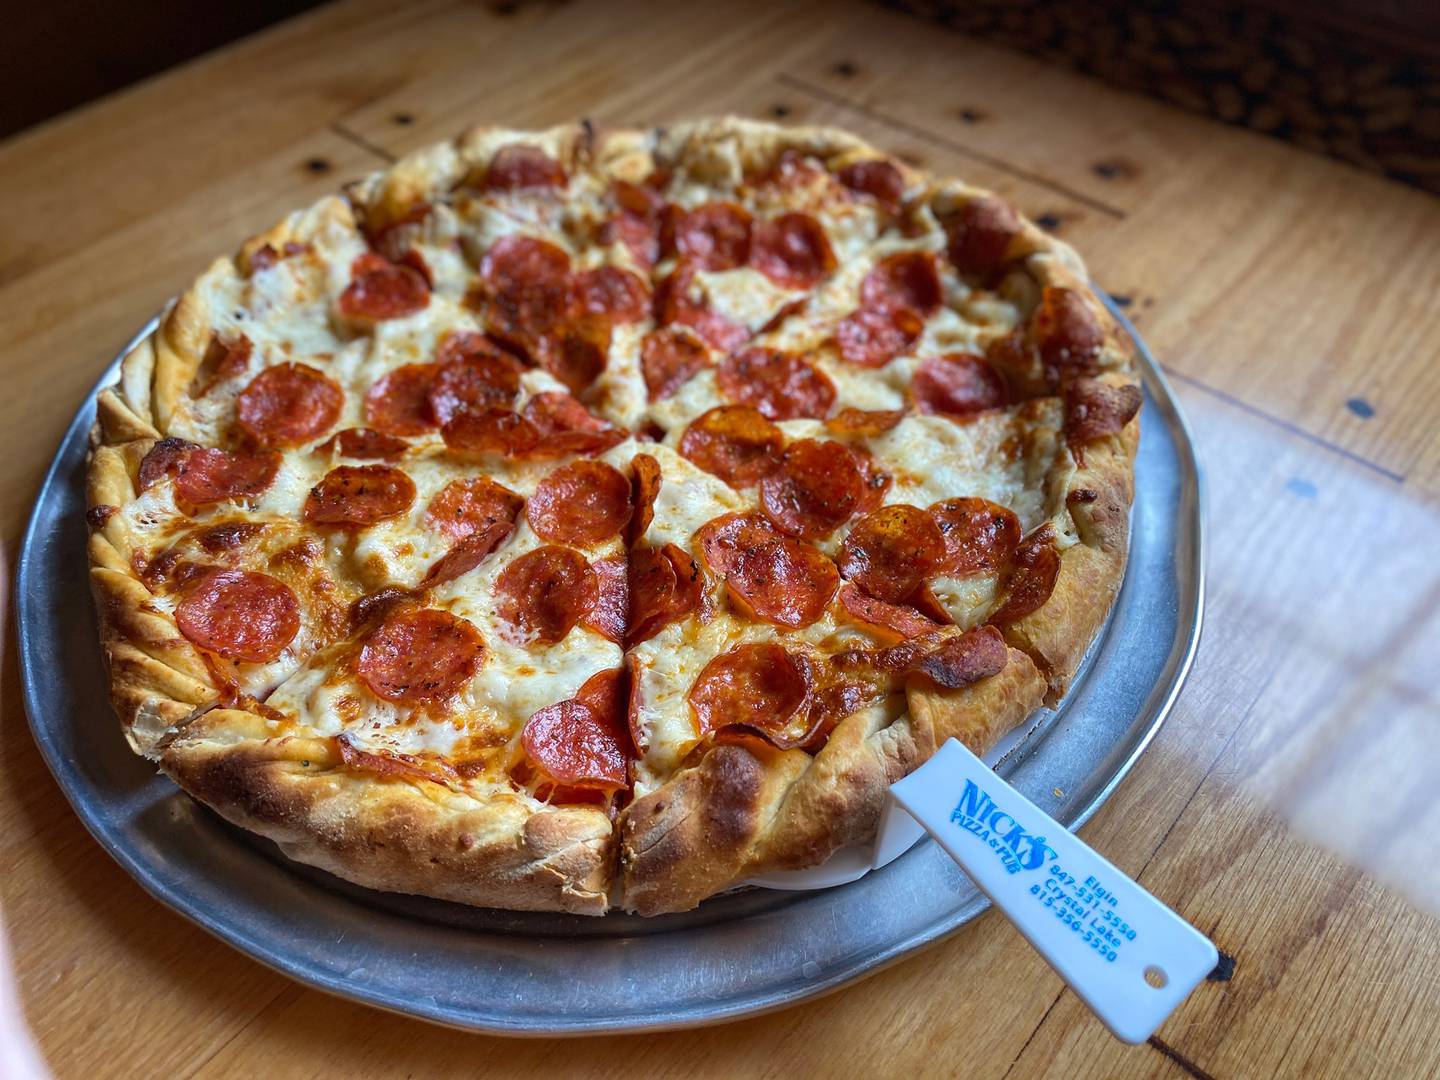 Nick's Pizza and Pub was voted in the top 10 as one of the best pizza places in McHenry County. (Photo from Nick's Pizza and Pub Facebook page)